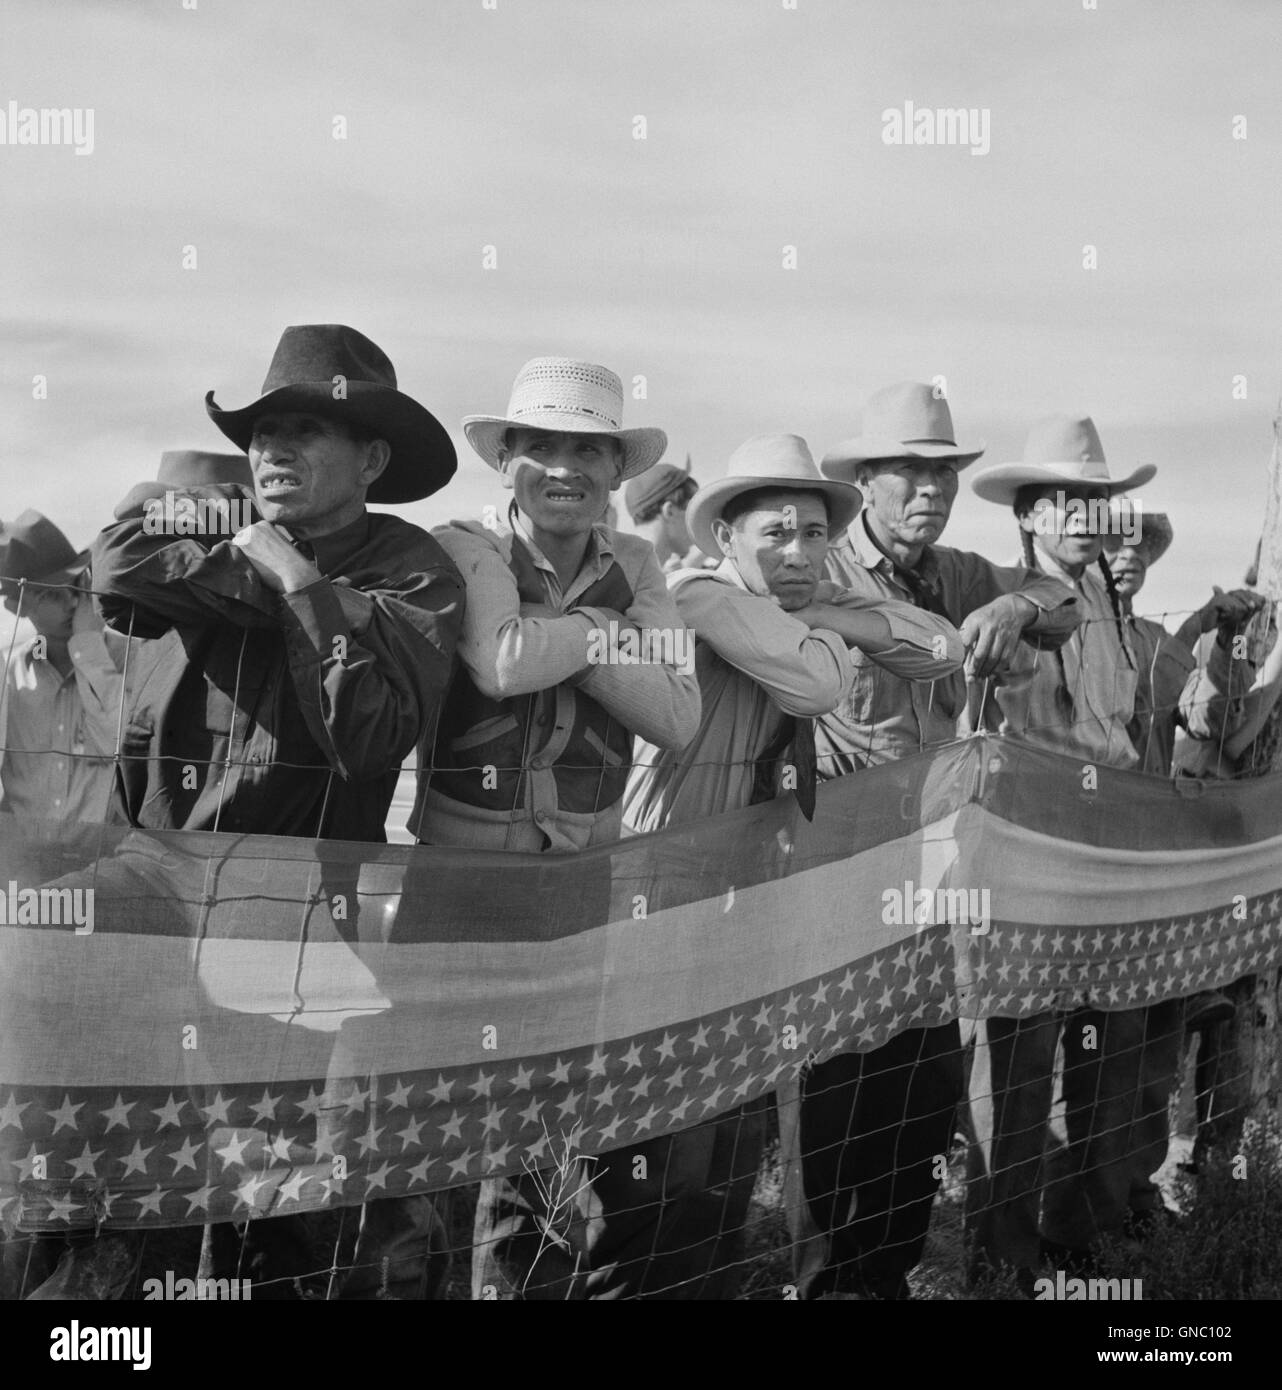 Native Americans Watching Crow Fair, Crow Agency, Montana, USA, Marion Post Wolcott for Farm Security Administration, July 1941 Stock Photo